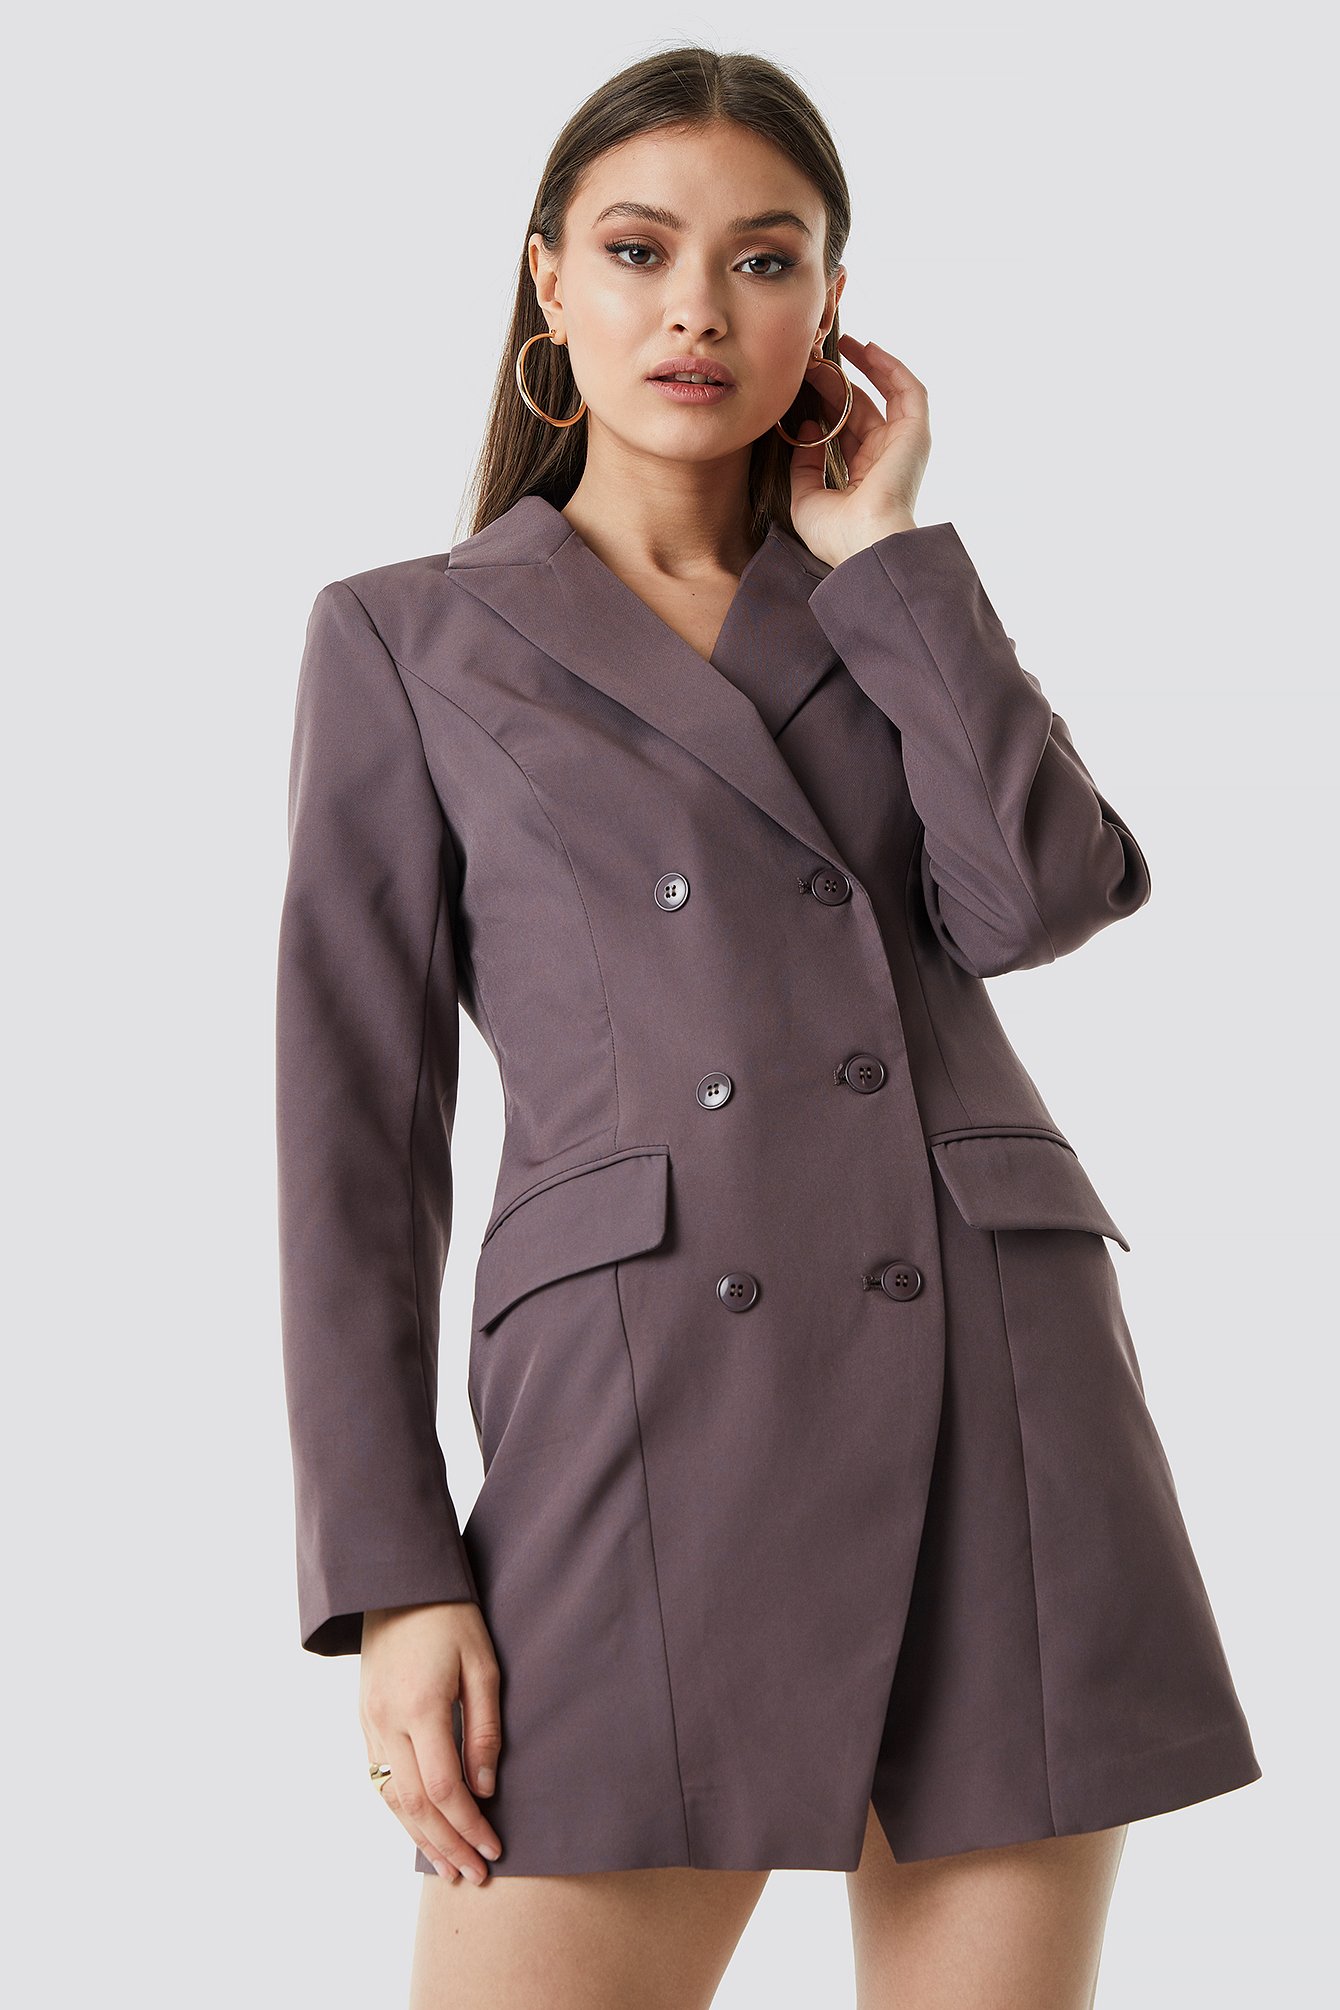 Brown Double Breasted Short Blazer Dress